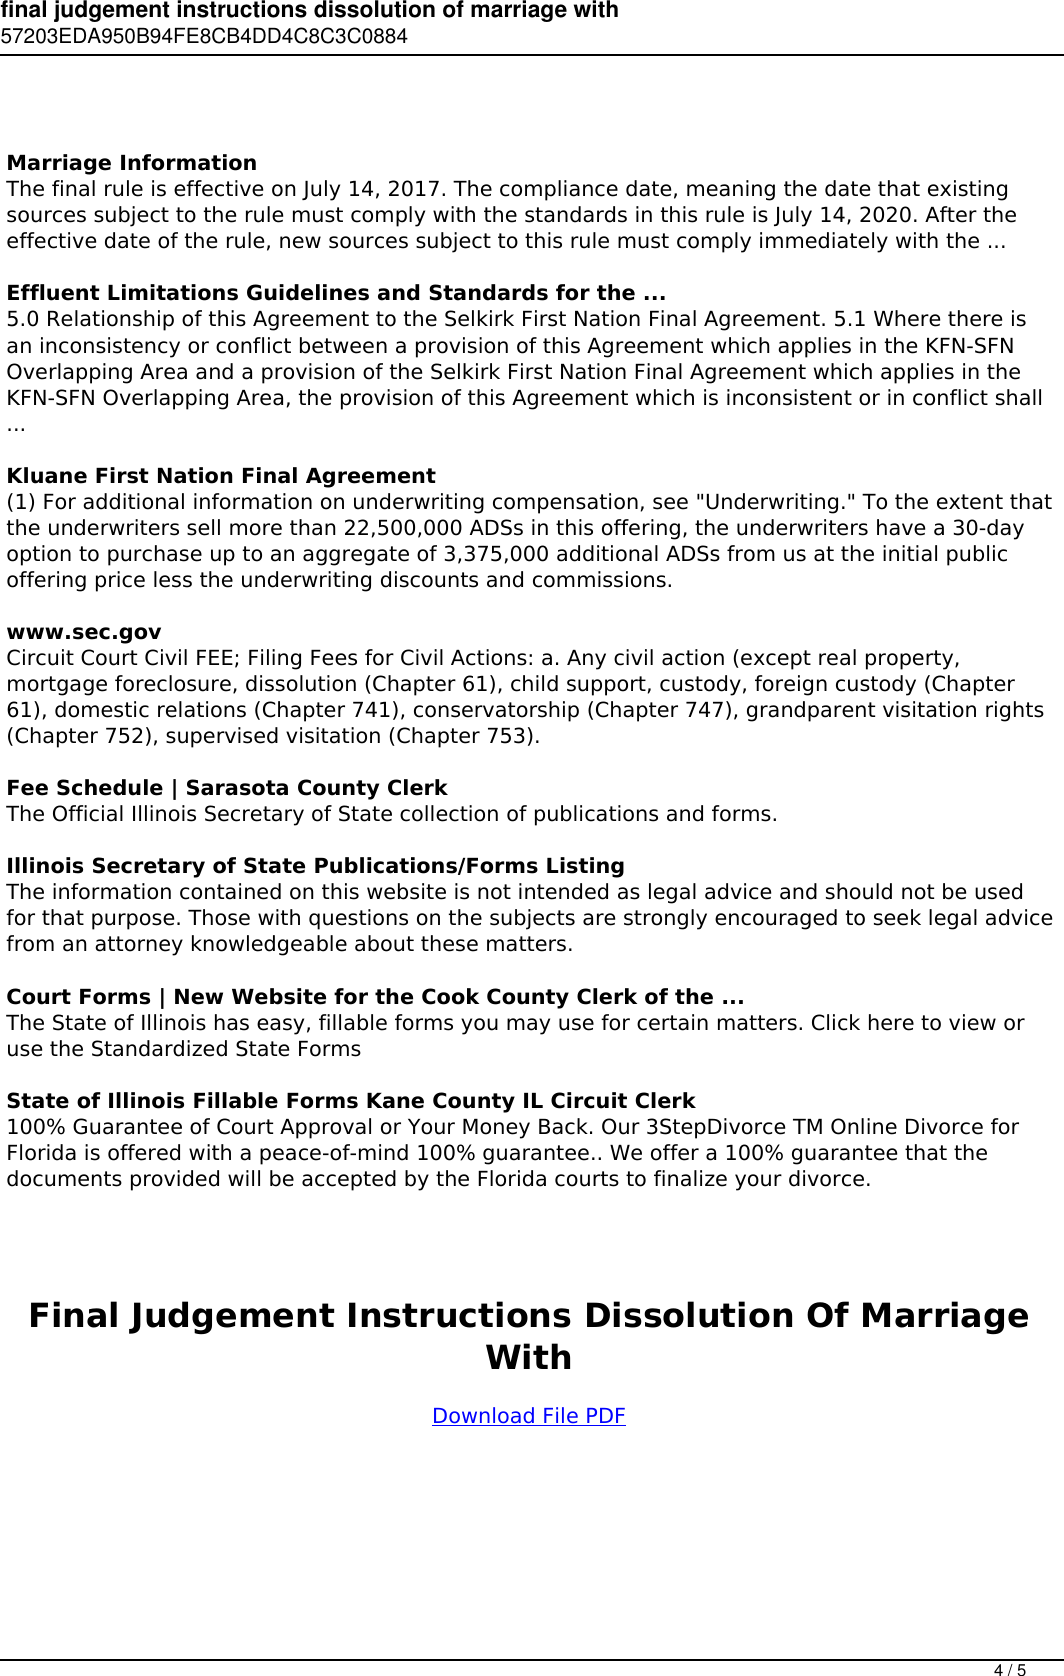 Page 4 of 5 - Judgement Instructions Dissolution Of Marriage With